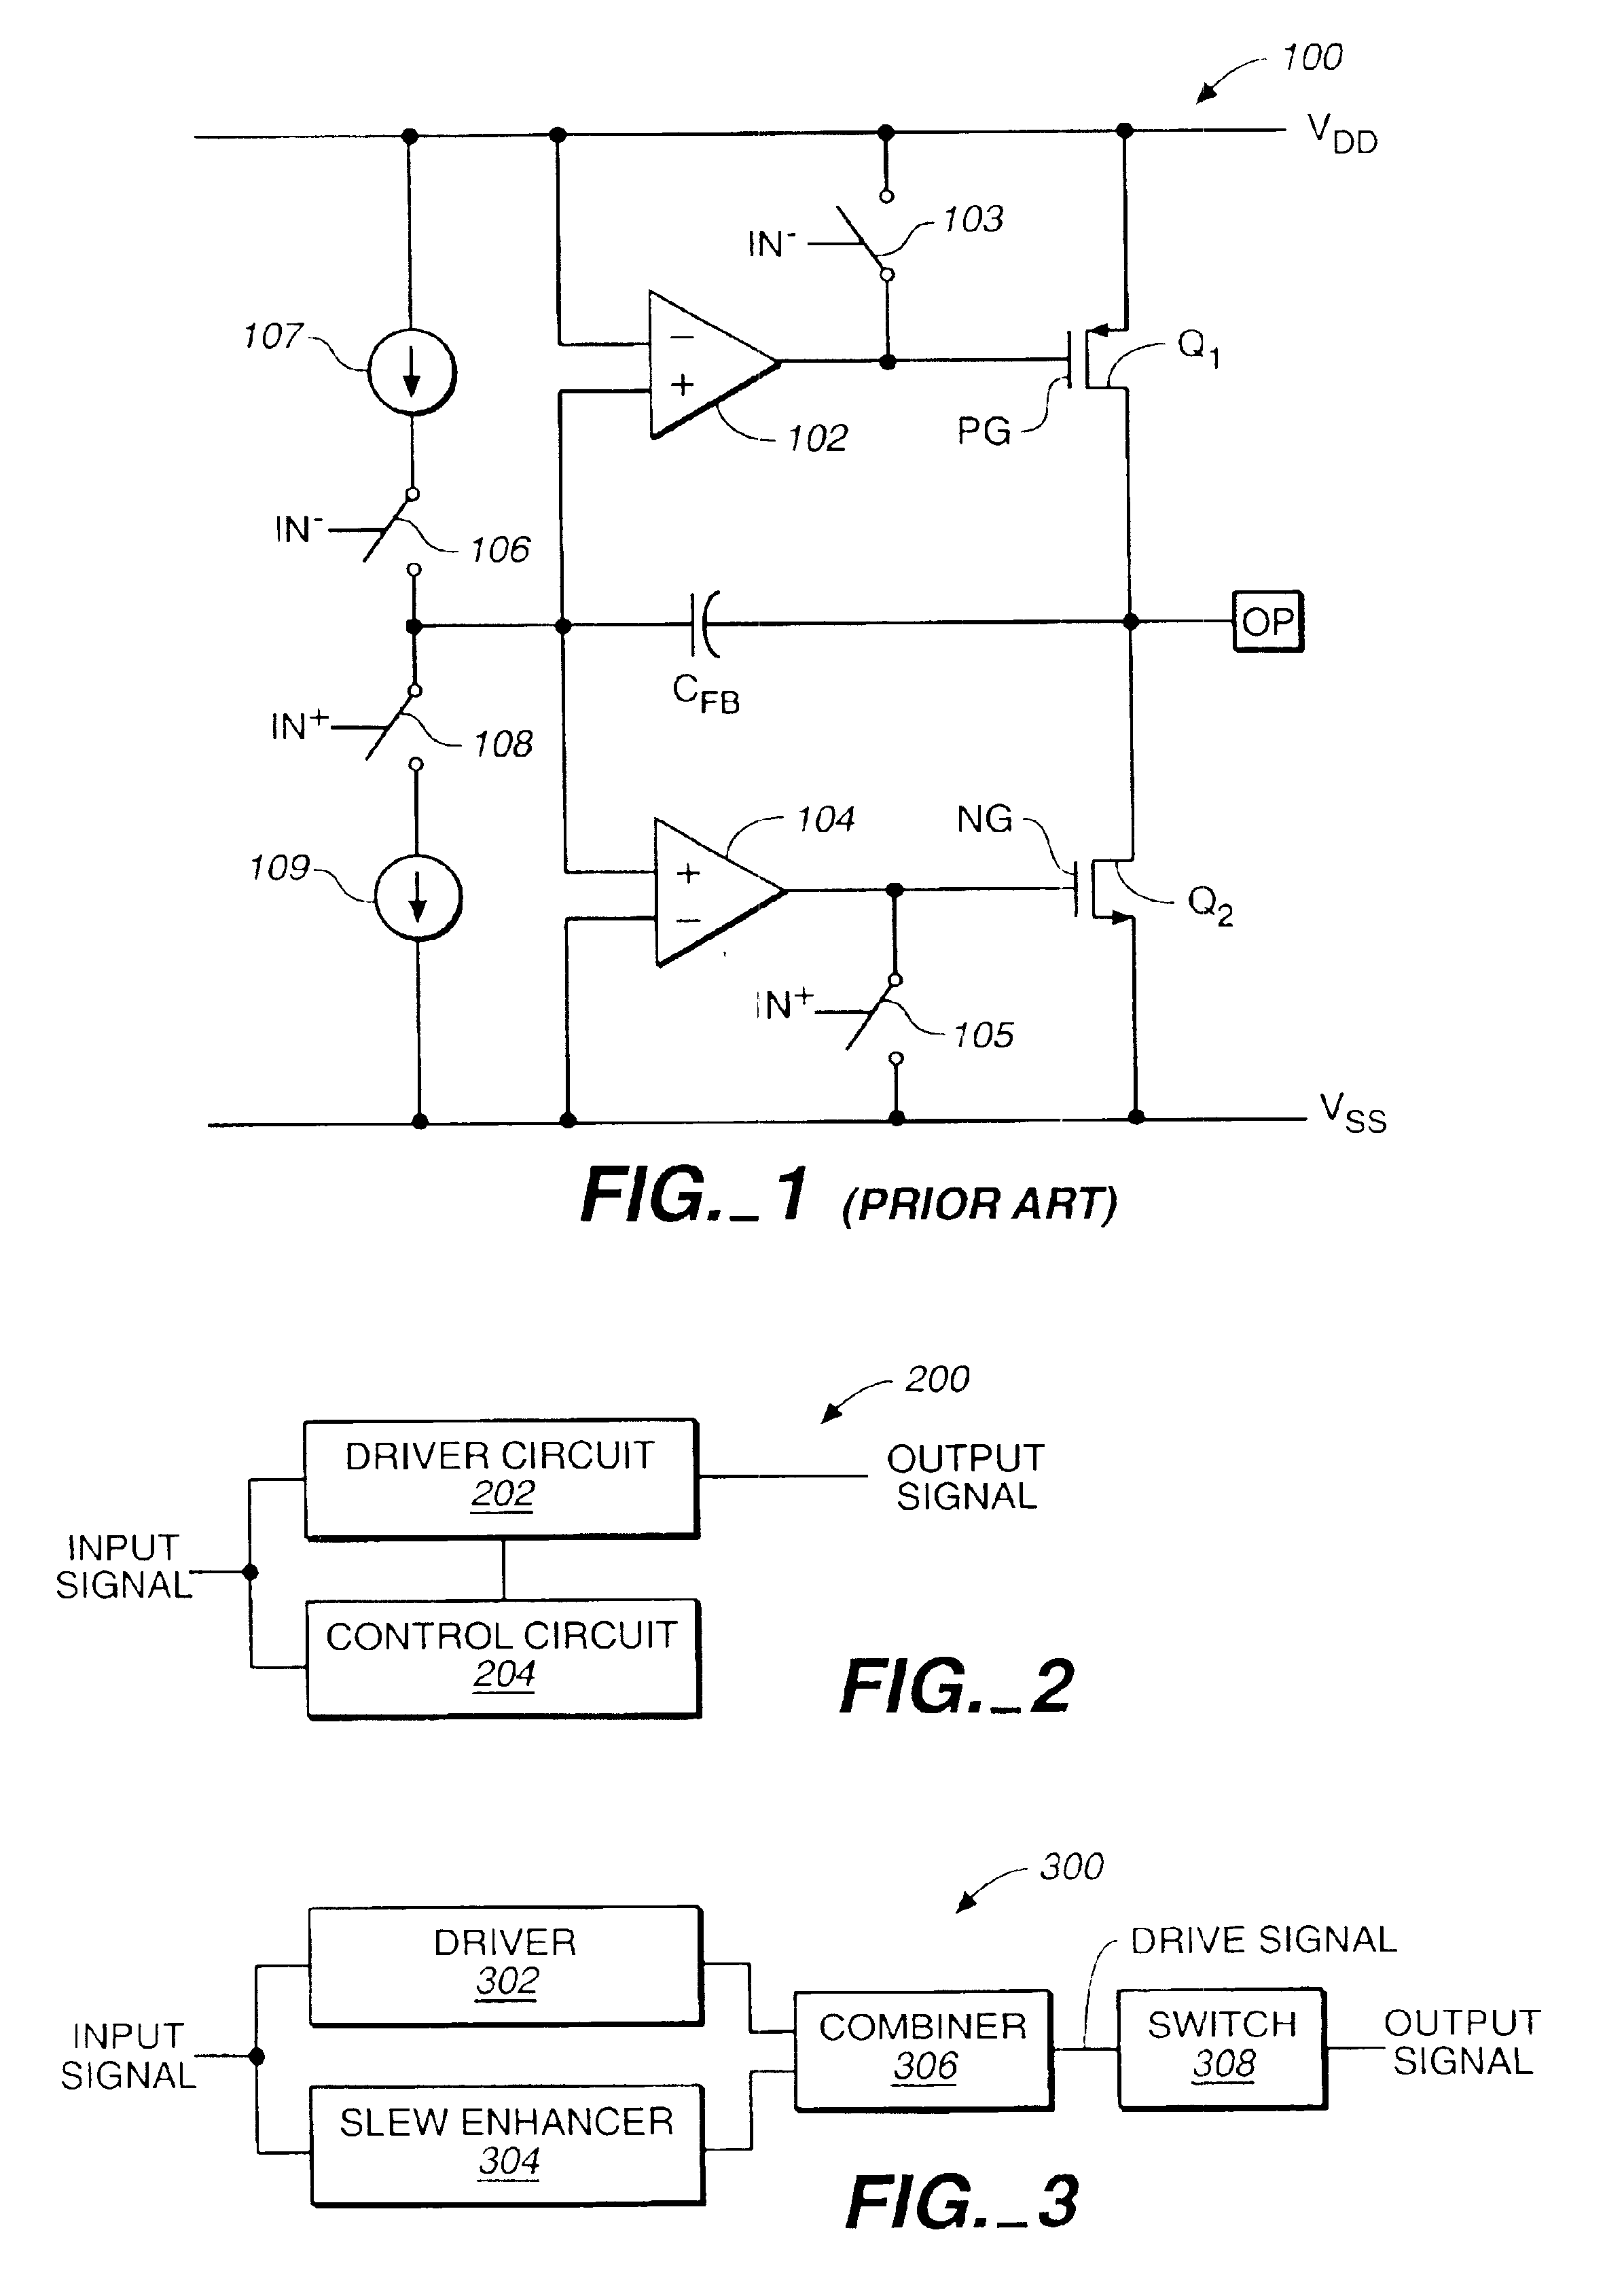 Method and apparatus for slew control of an output signal